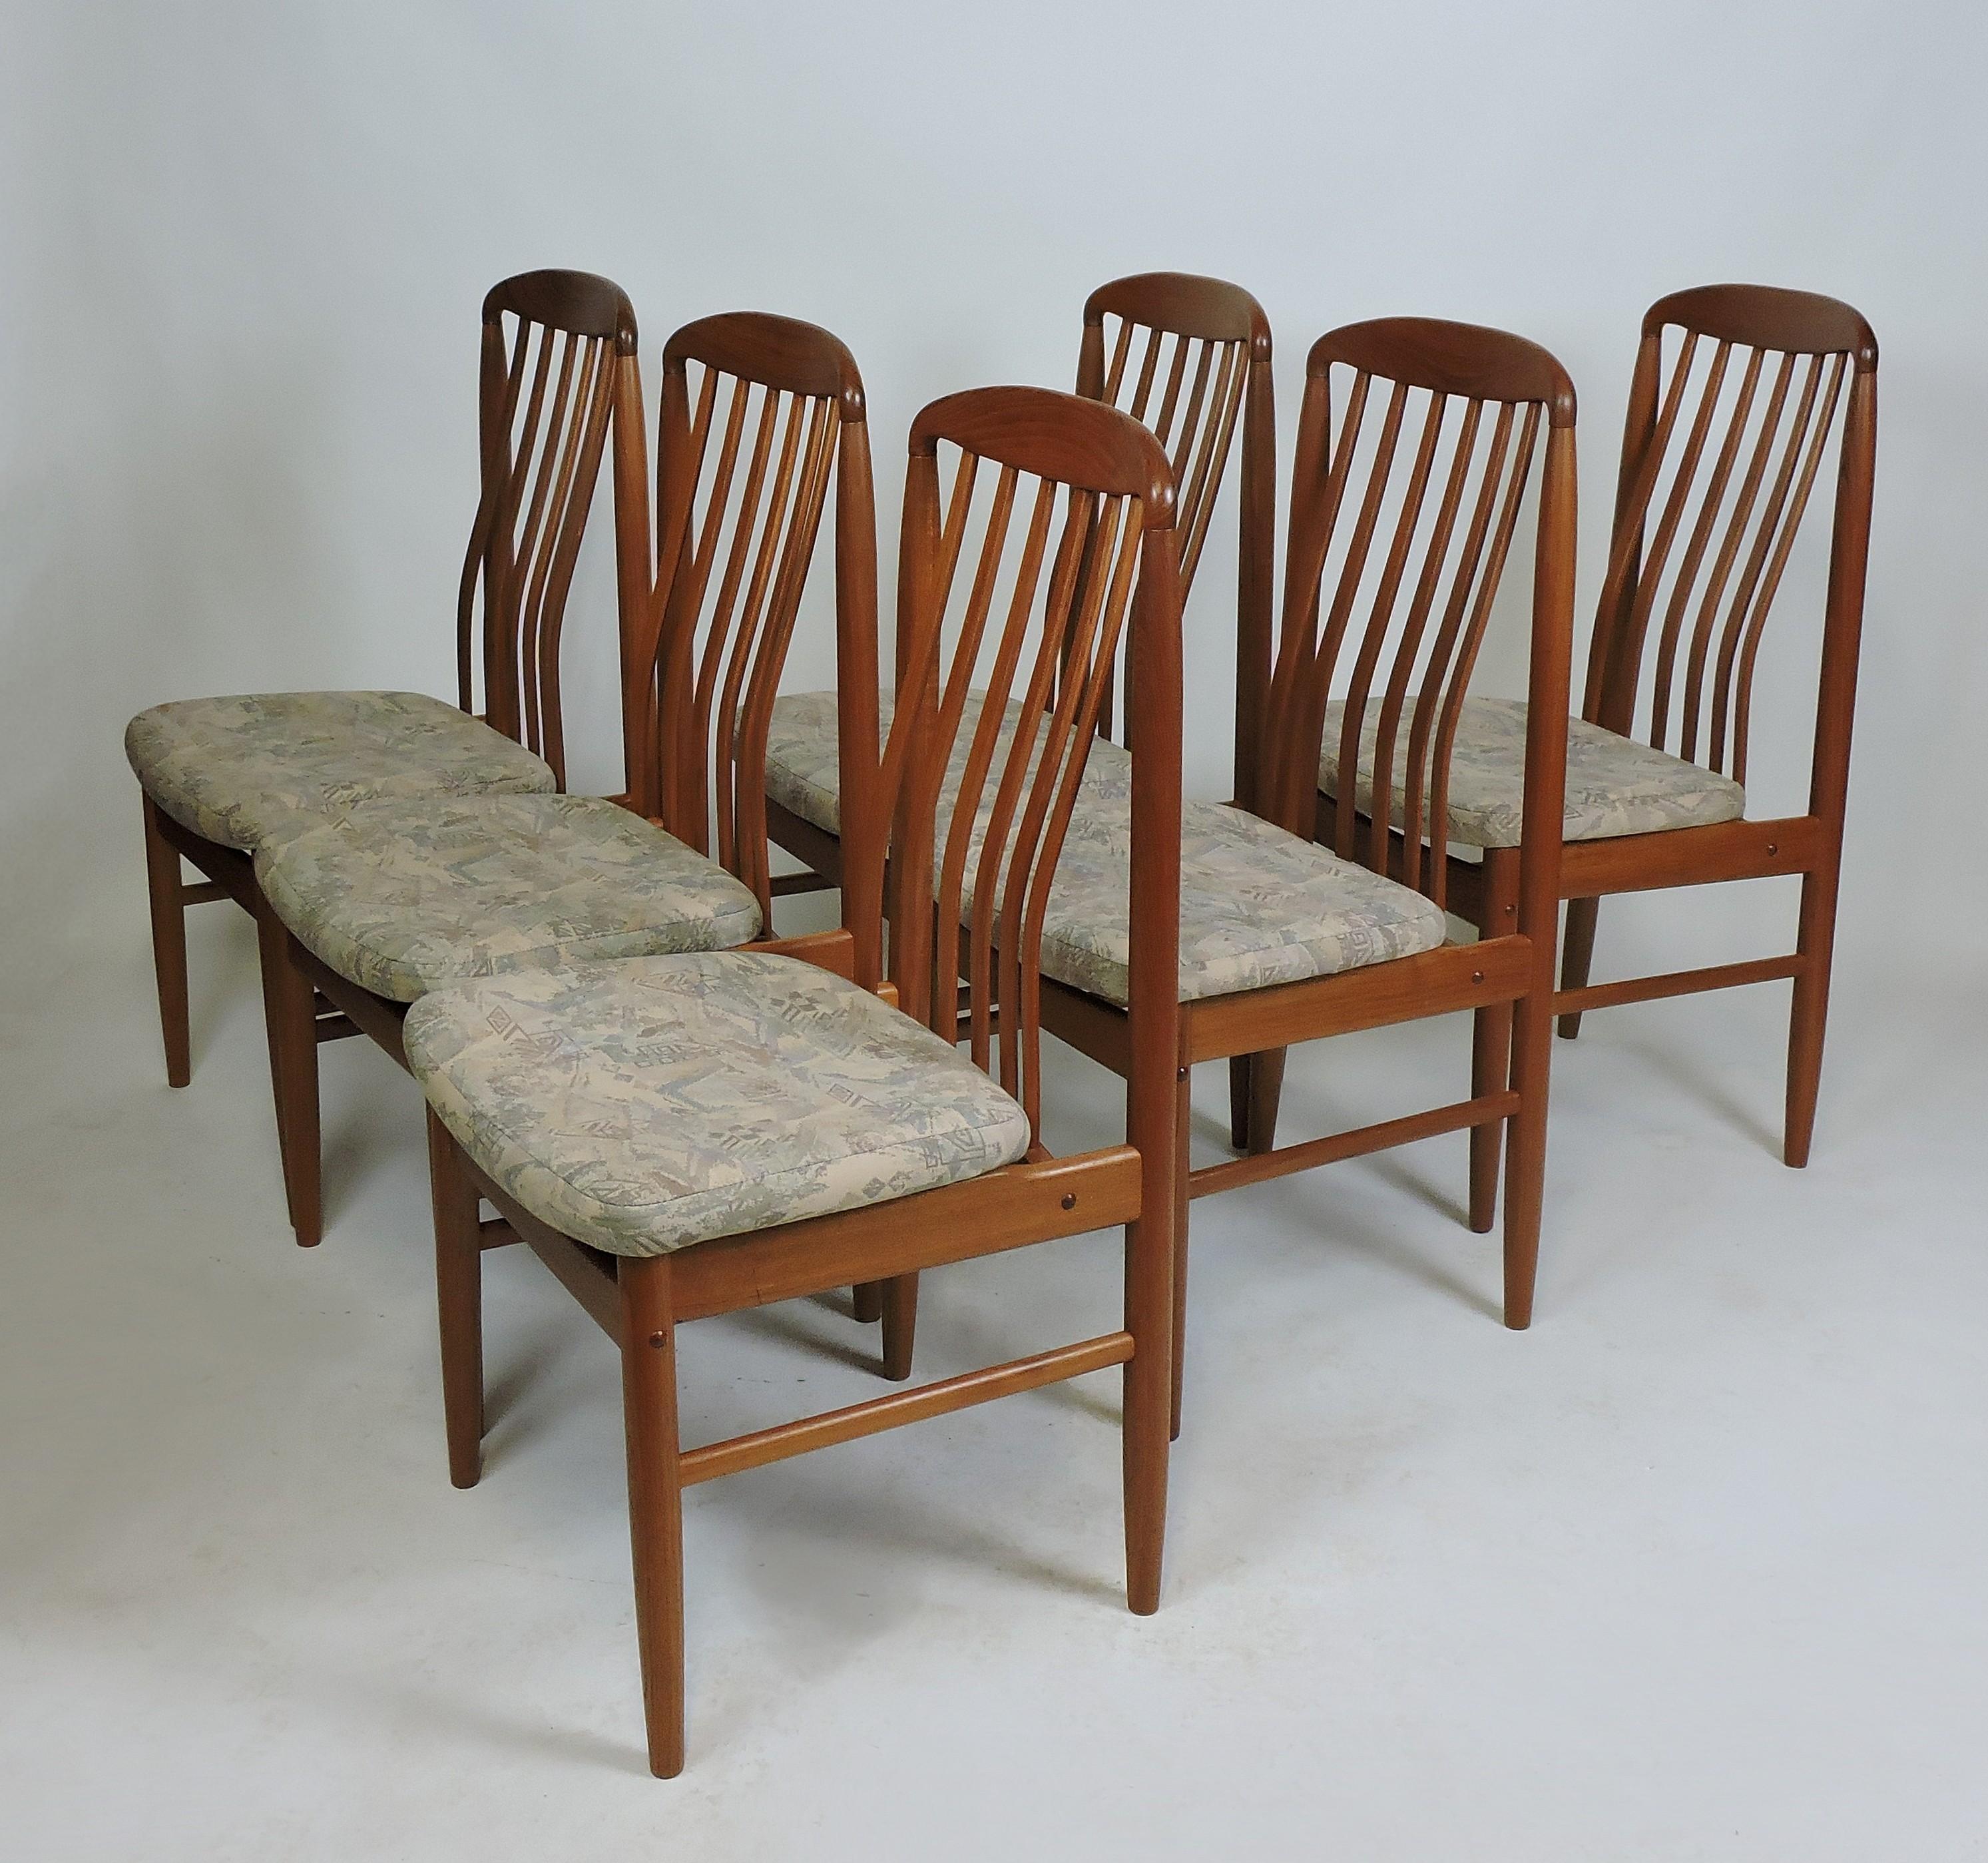 Set of six BL10 Sanne dining chairs designed by Danish designer Benny Linden. These chairs are made of solid teak with contoured spindle backs and upholstered seats. Very comfortable chairs with a graceful look. Newly reupholstered in a white